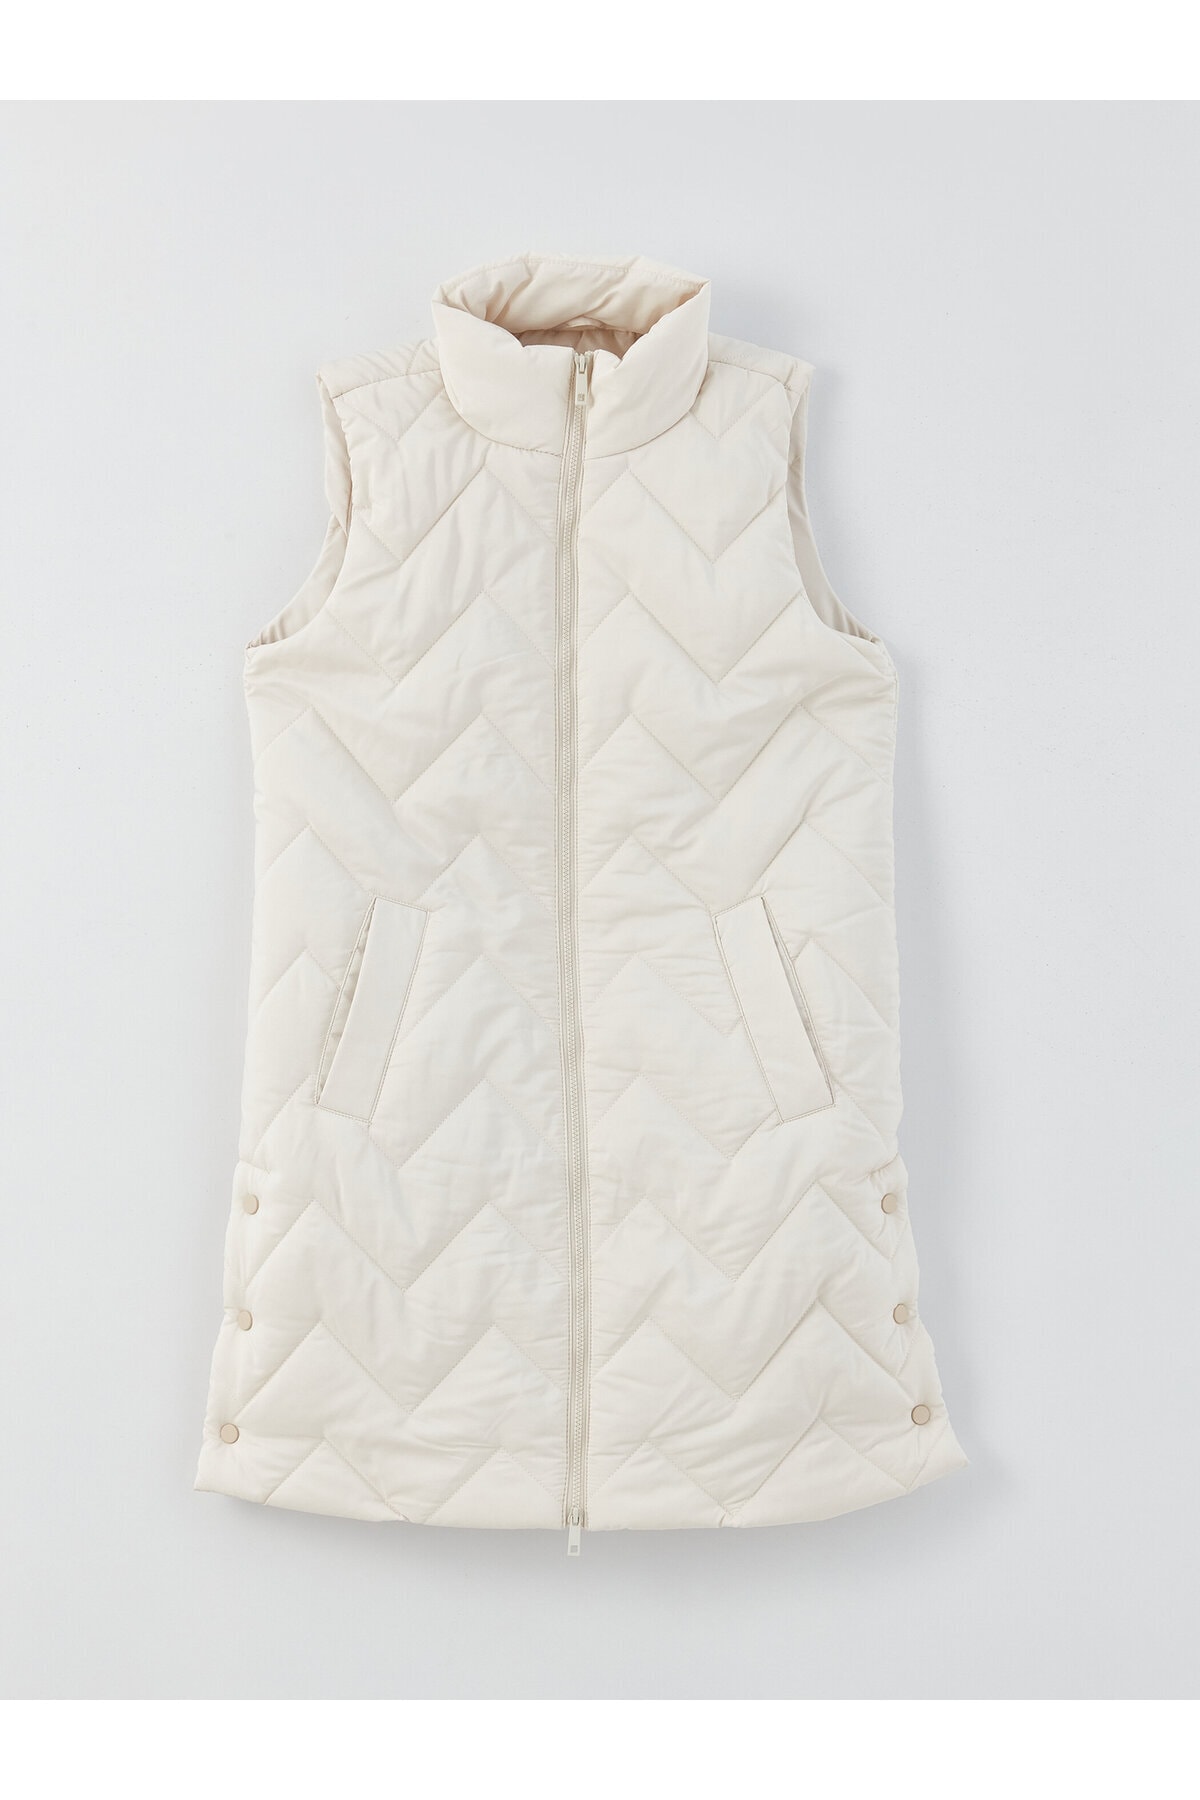 LC Waikiki LCW Modest Stand-up Collar Self-Patterned Women's Puffer Vest